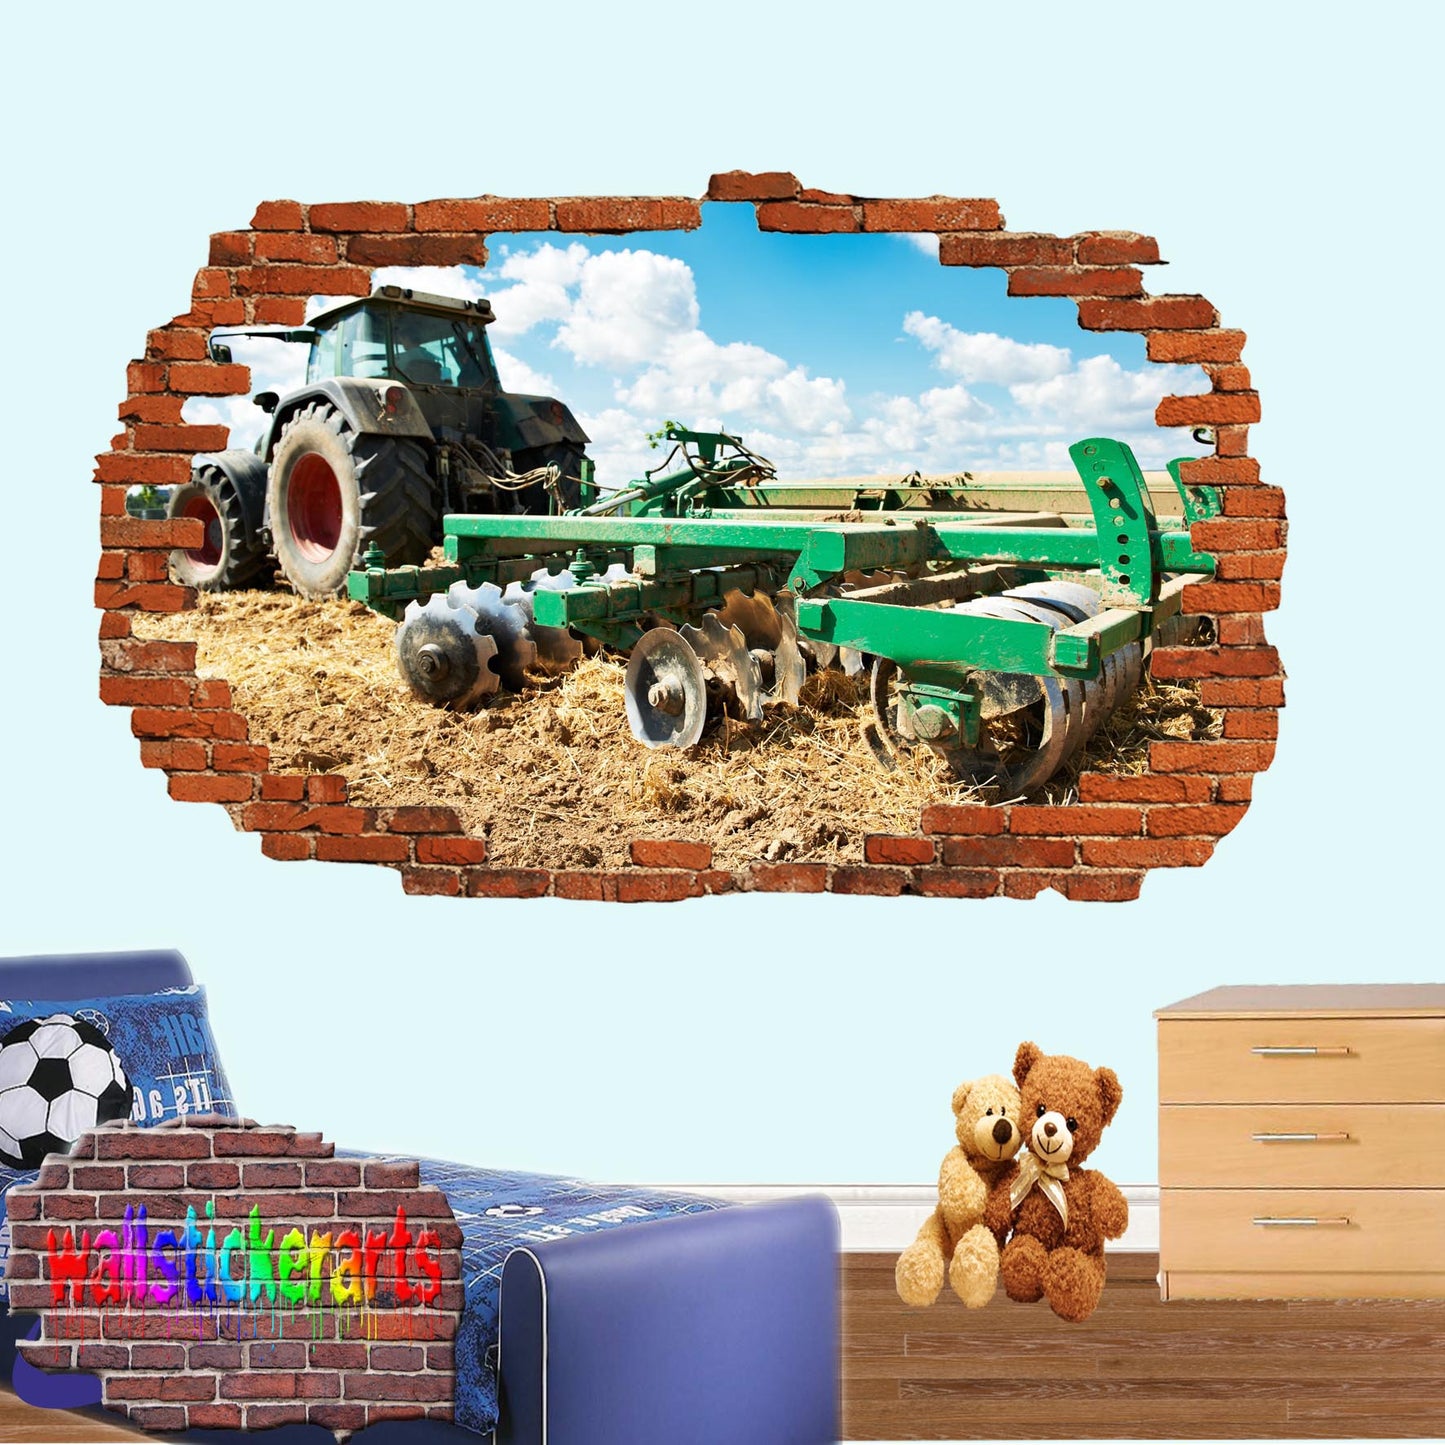 TRACTOR PLOWING FIELD AGRICULTURAL FARMING TOOLS POSTER WALL STICKER